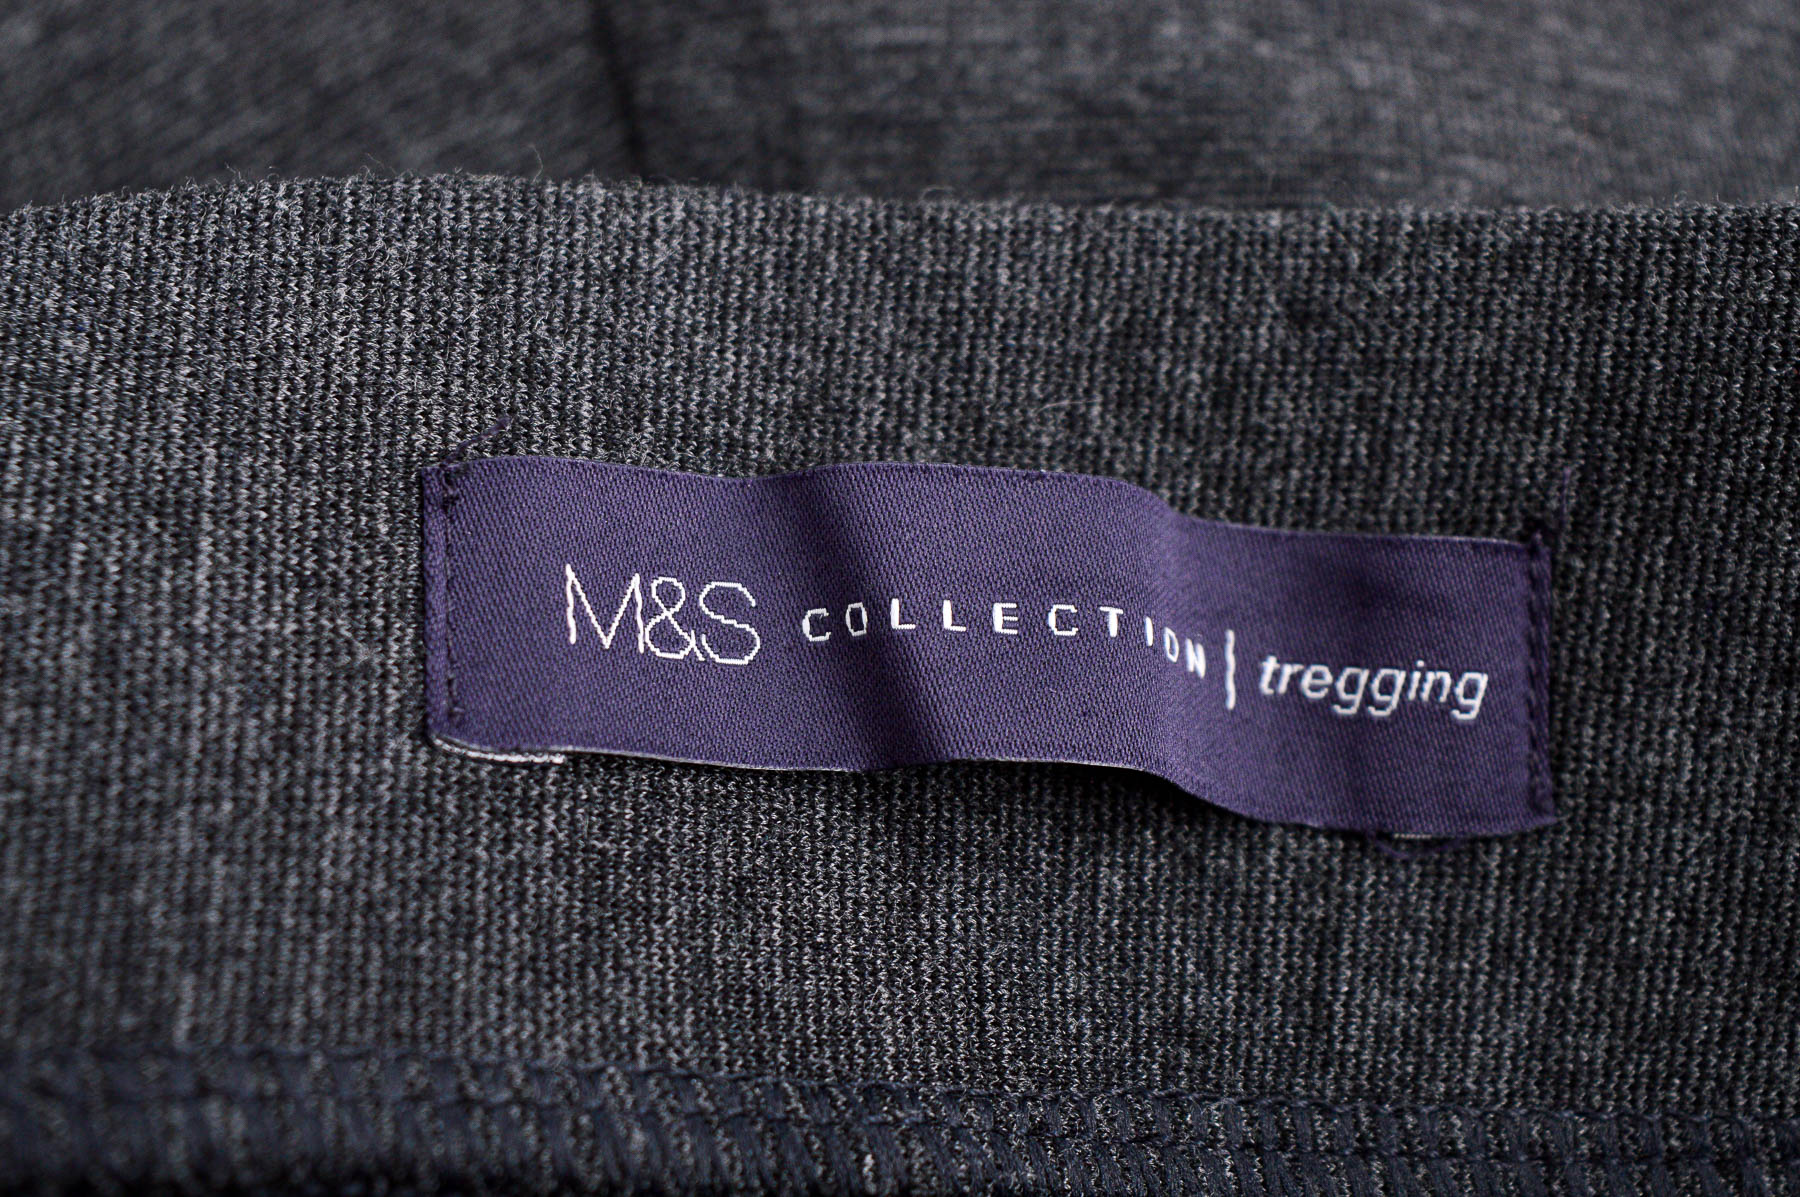 Leggings - M&S COLLECTION - 2